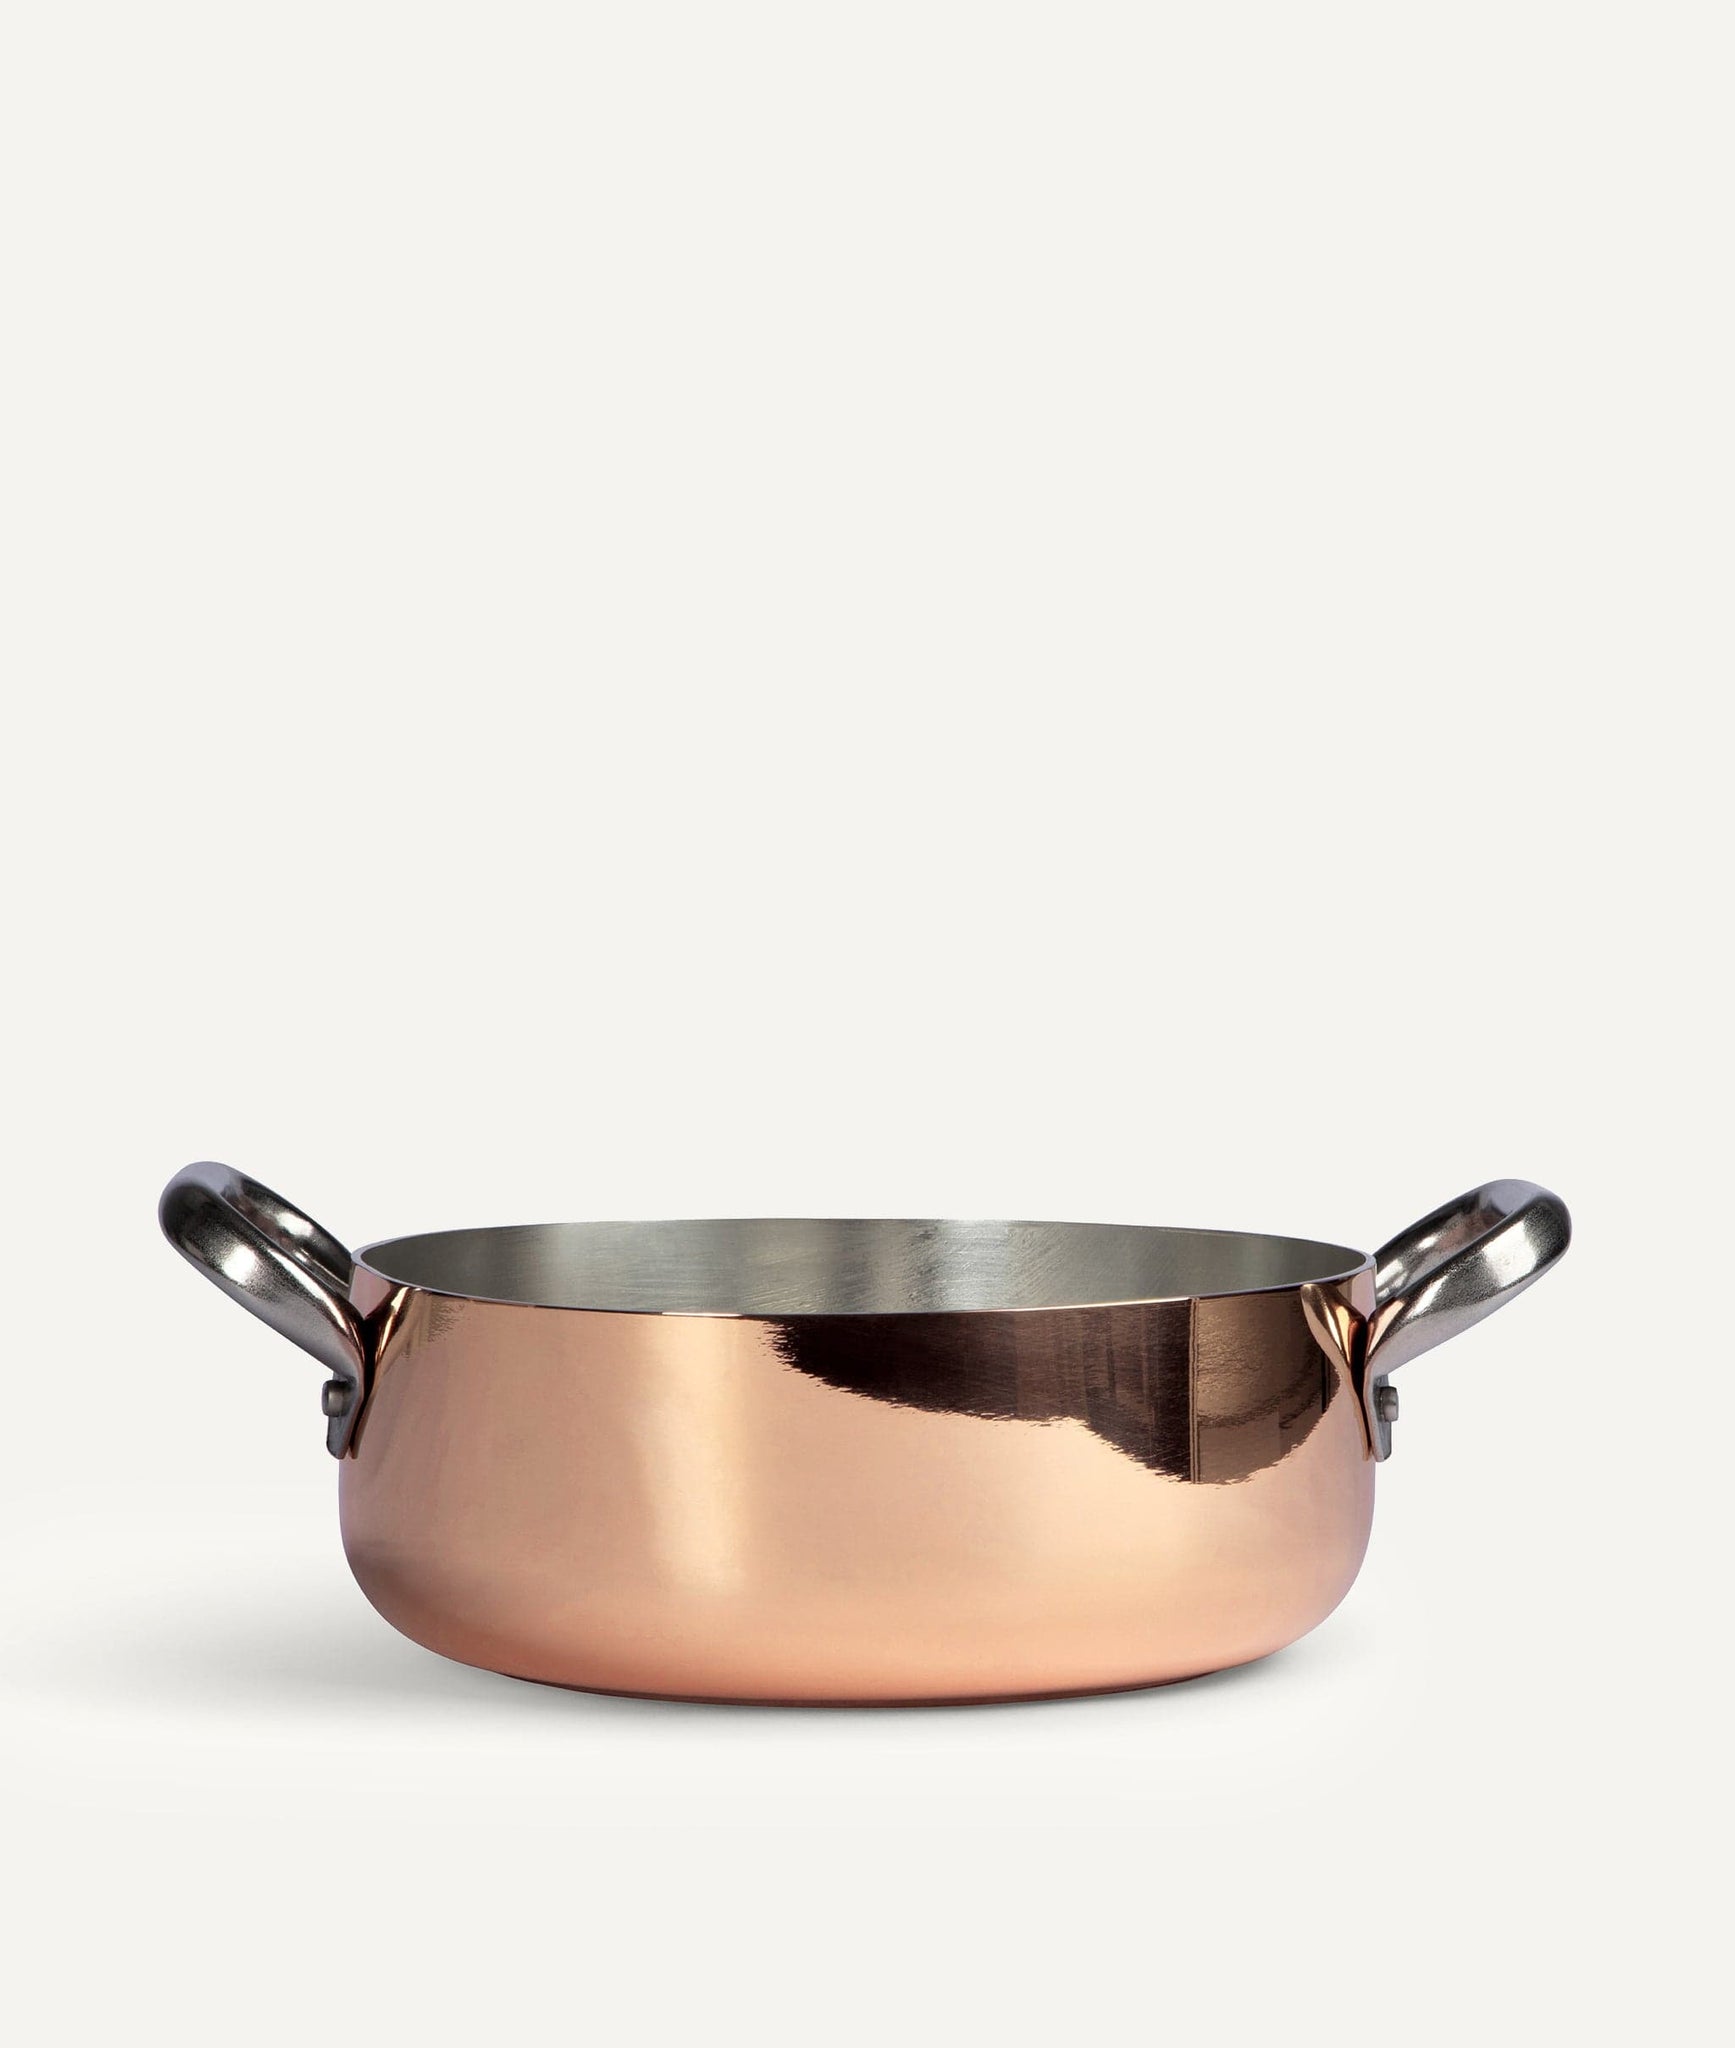 Induction low casserole in Tinned Copper